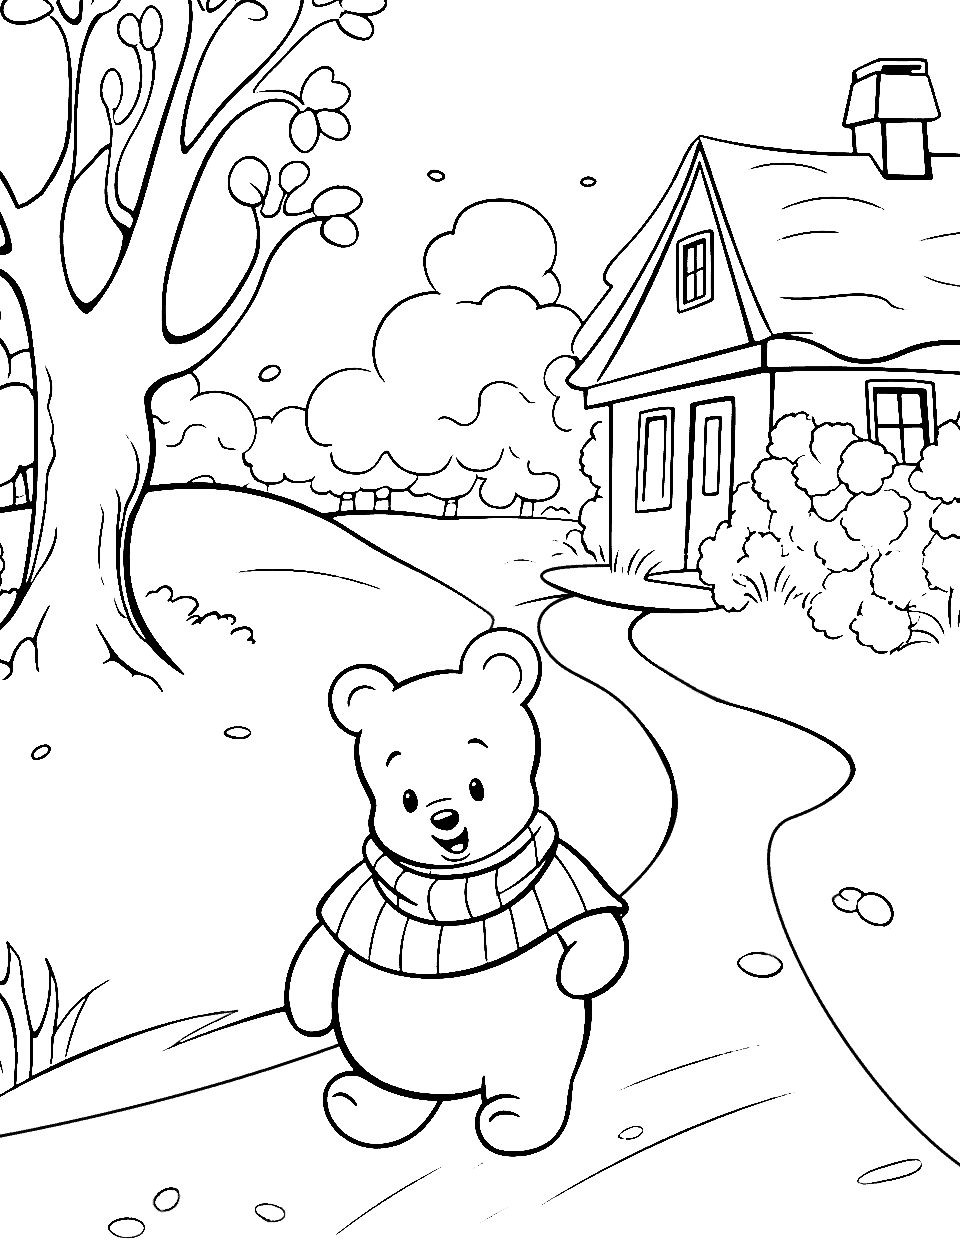 Snowy Winter Day Coloring Page - Winnie the pooh outside on a snowy day.